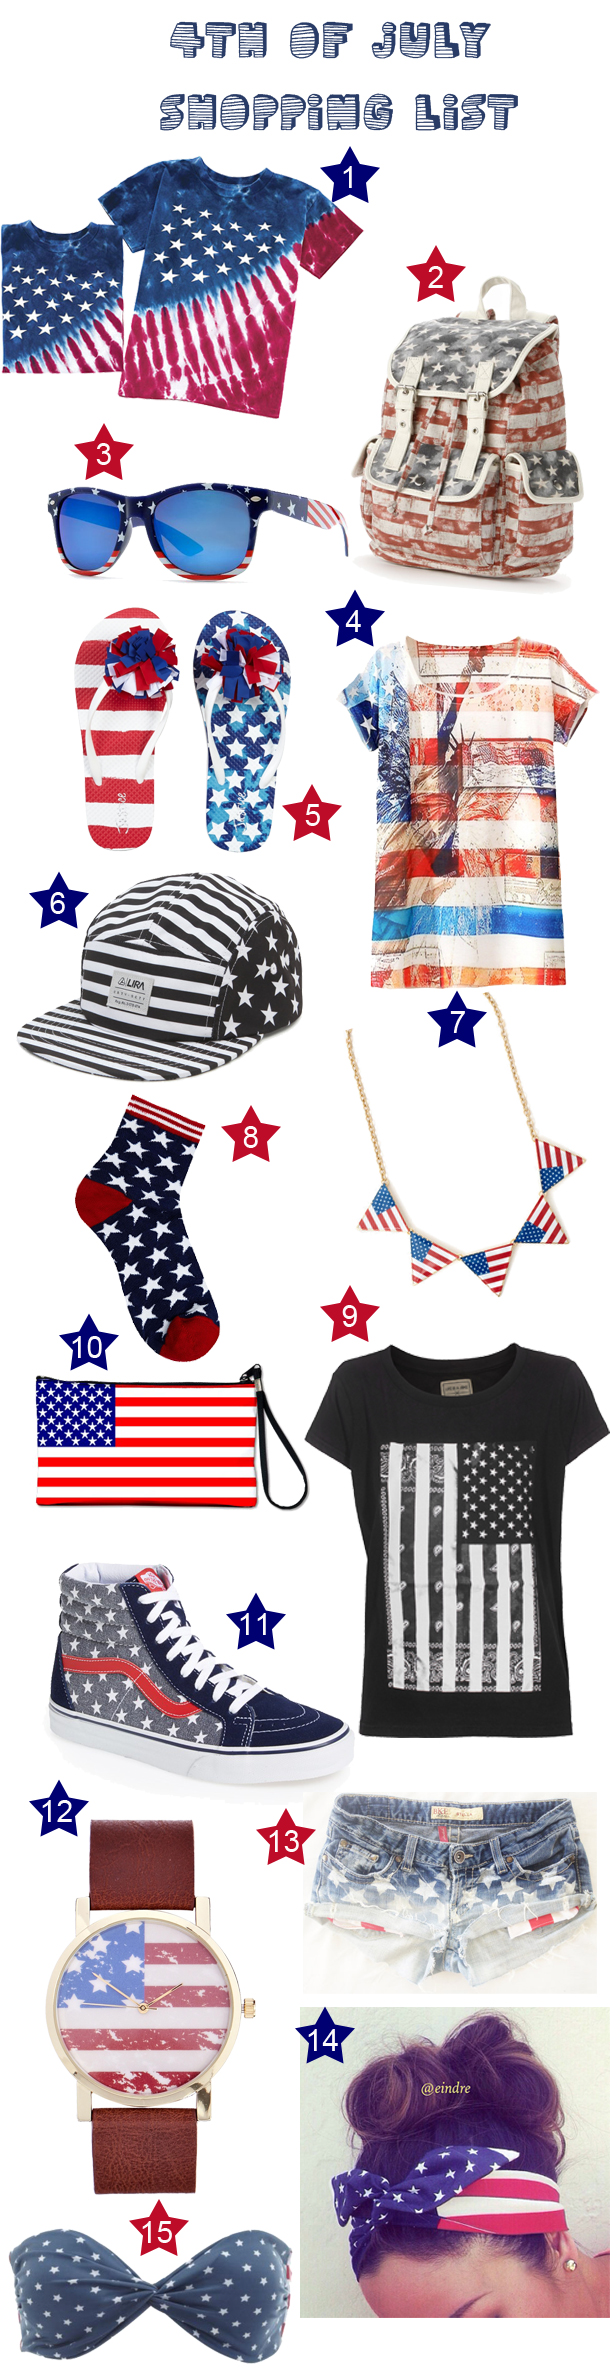 4th-july-list-of-shopping-stars-and-stripes-american-flag